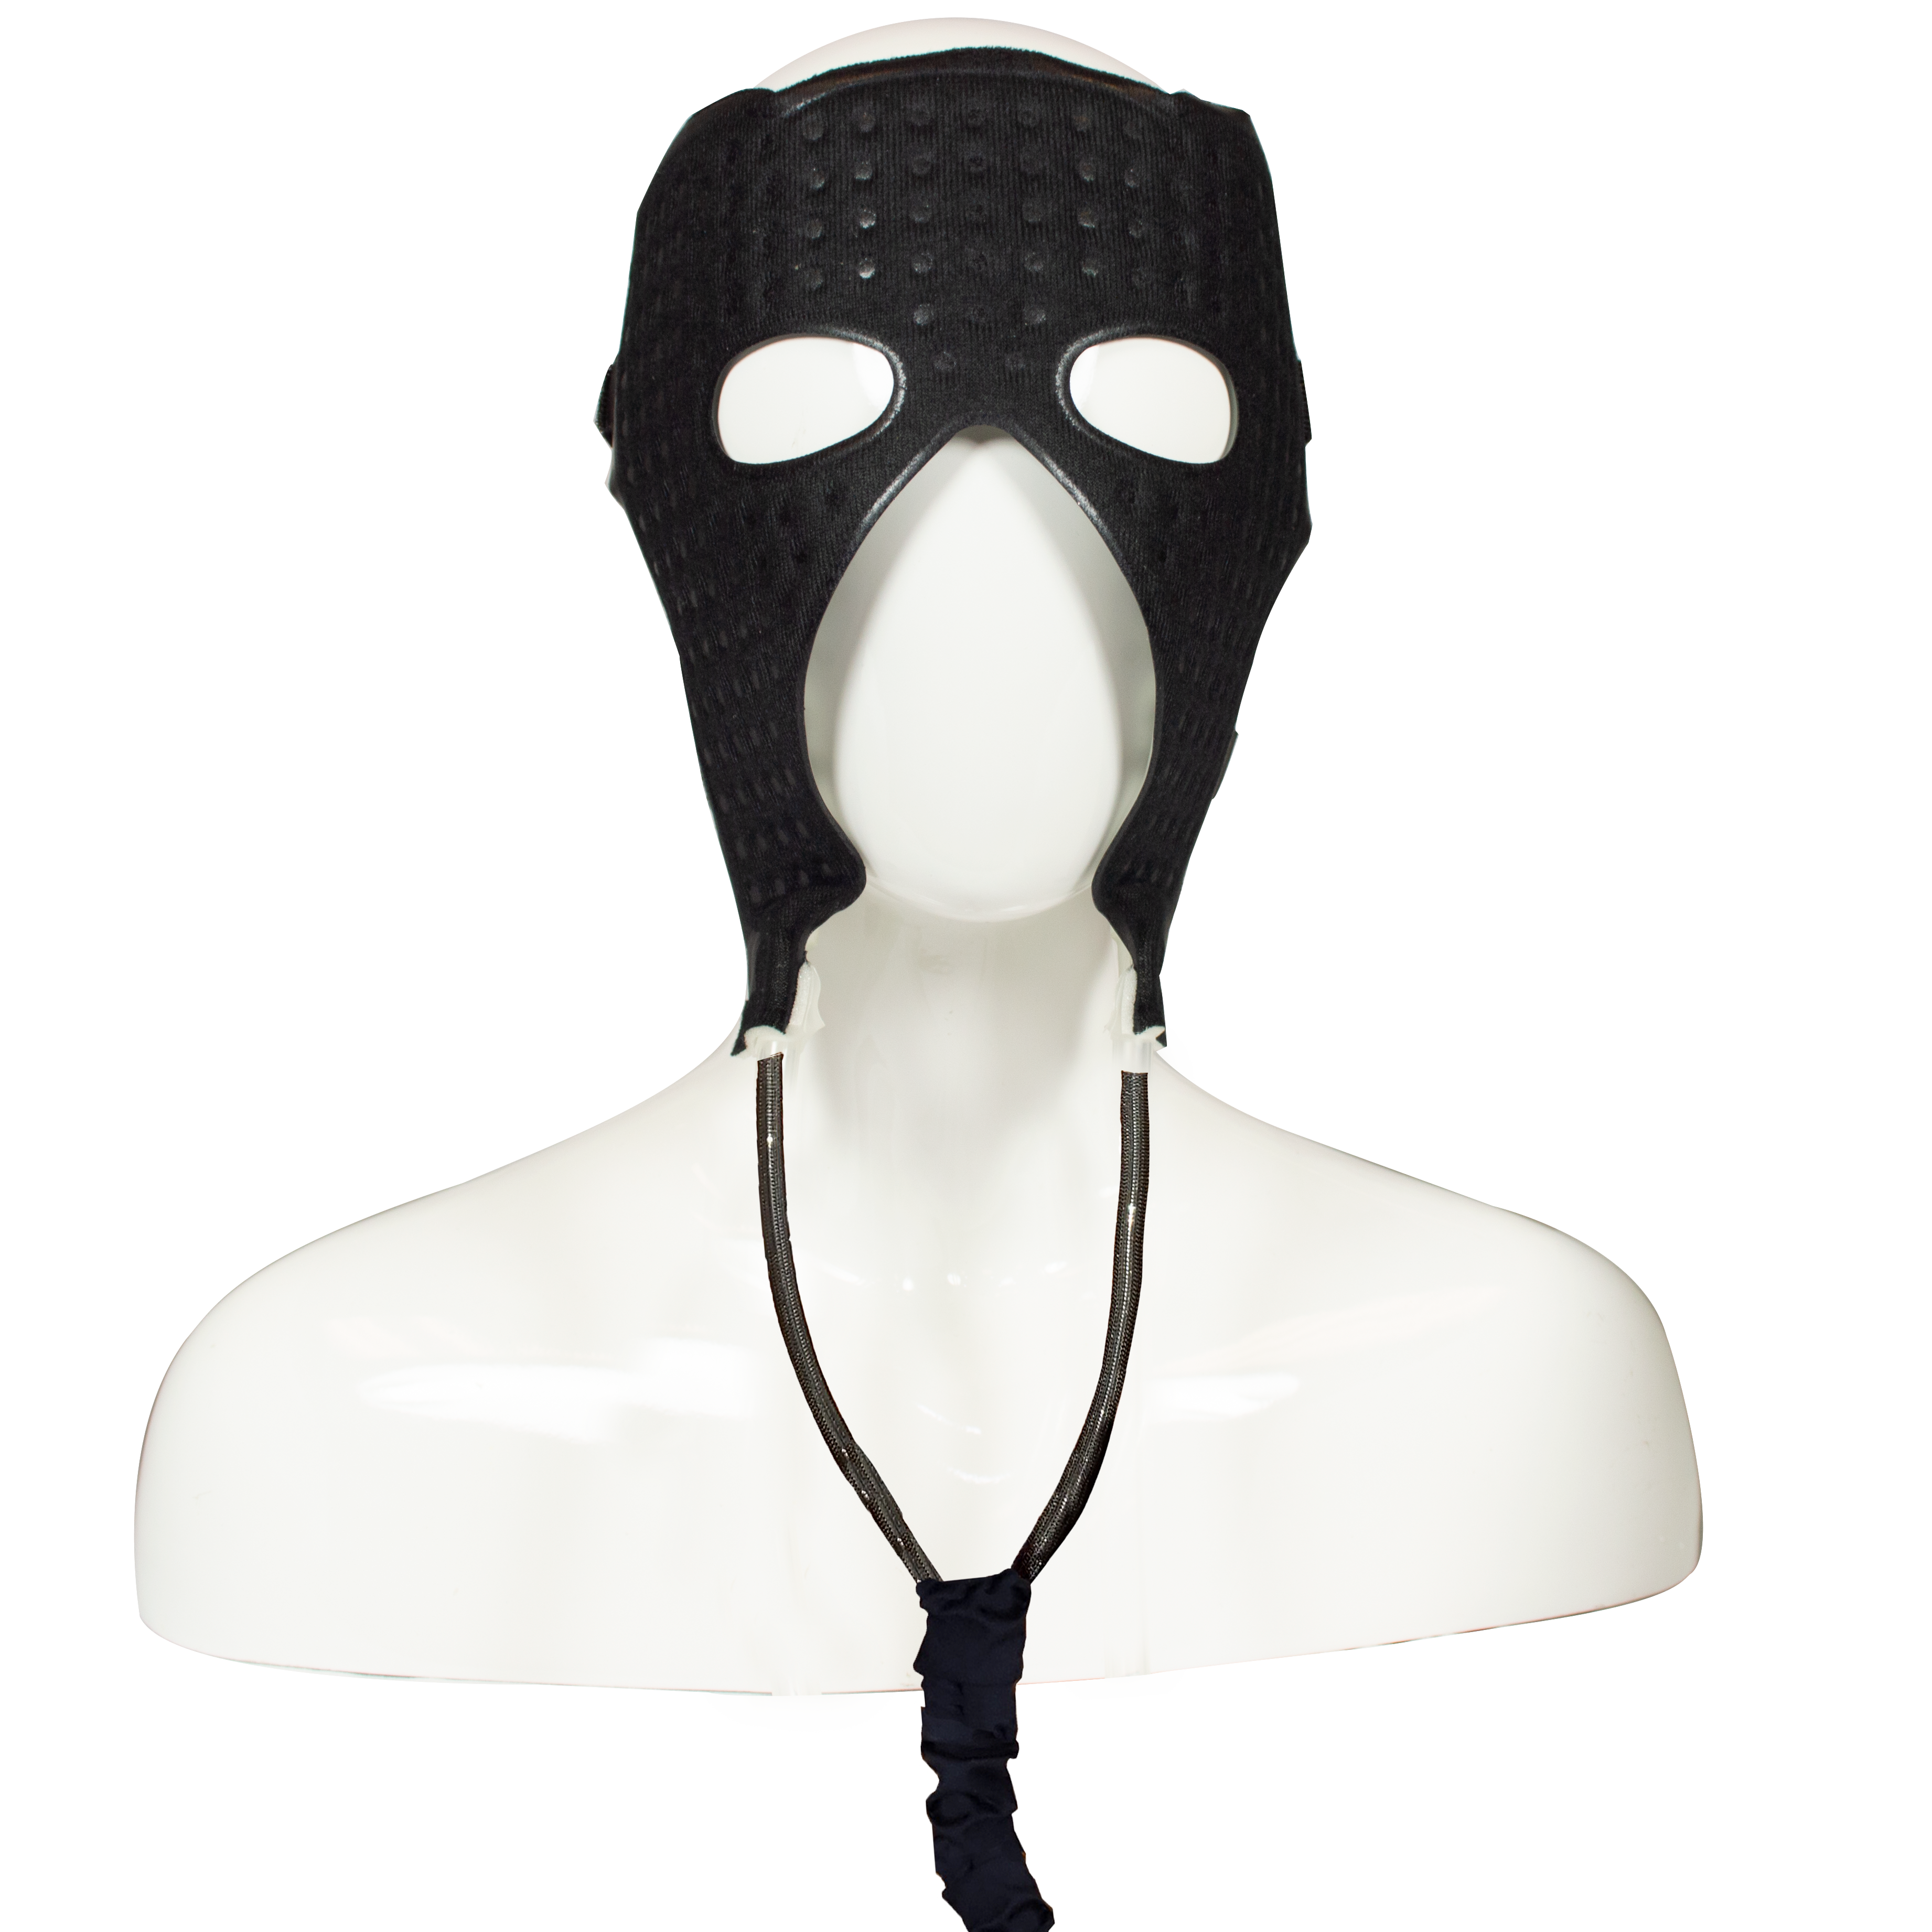 The cold circulating water therapy face mask on a mannequin